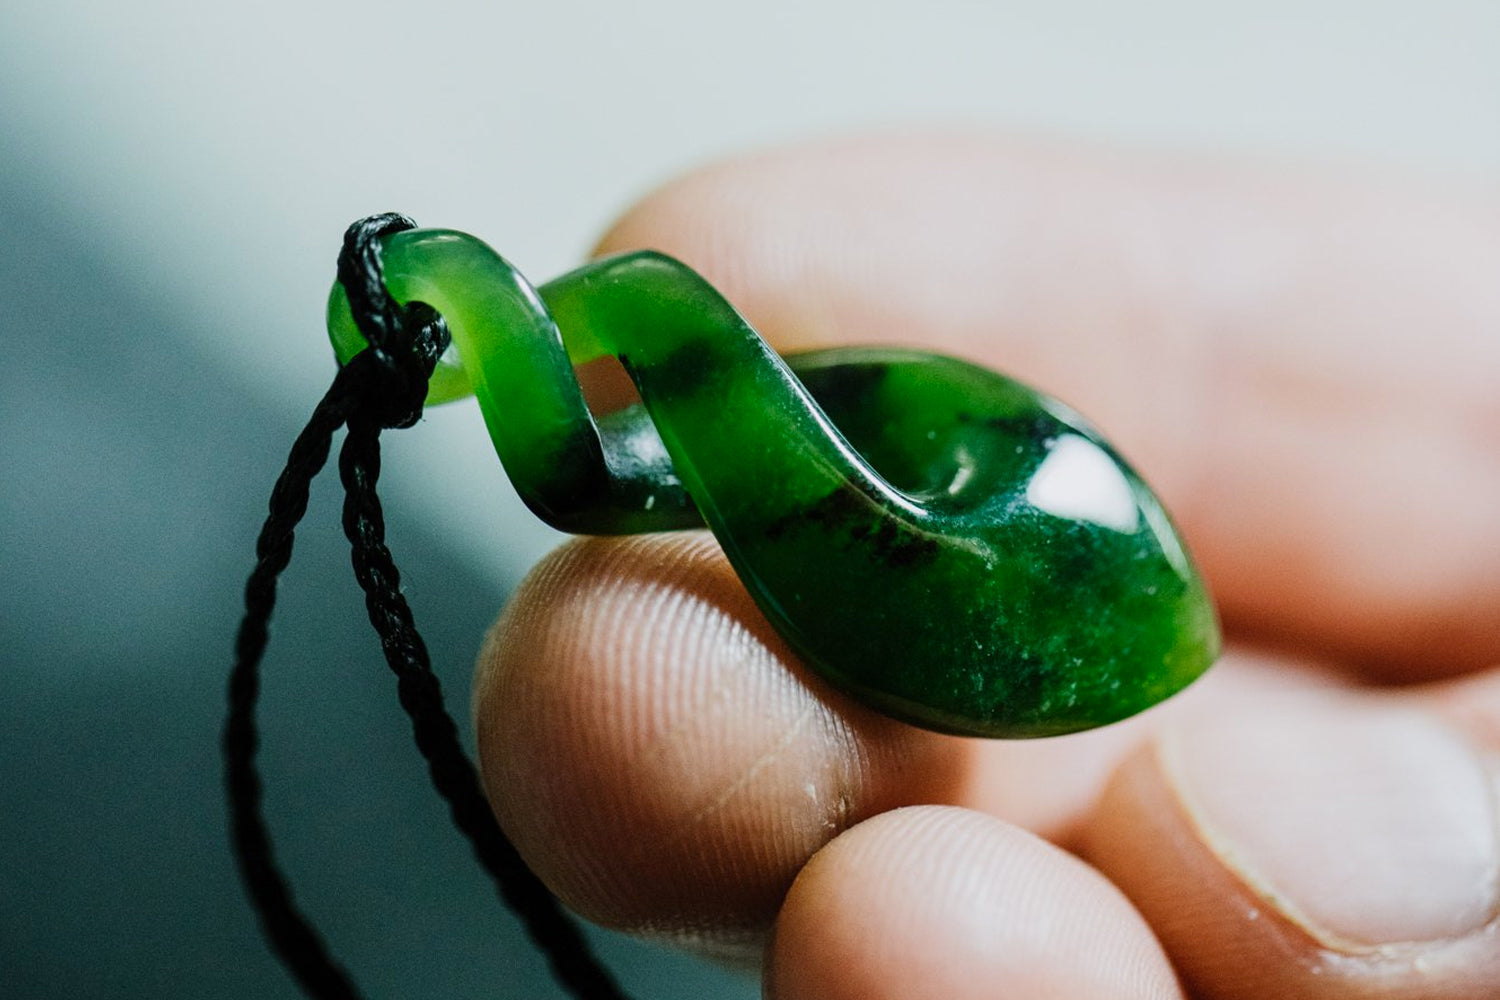 Greenstone necklace designs and 8 answers to questions customers ask us